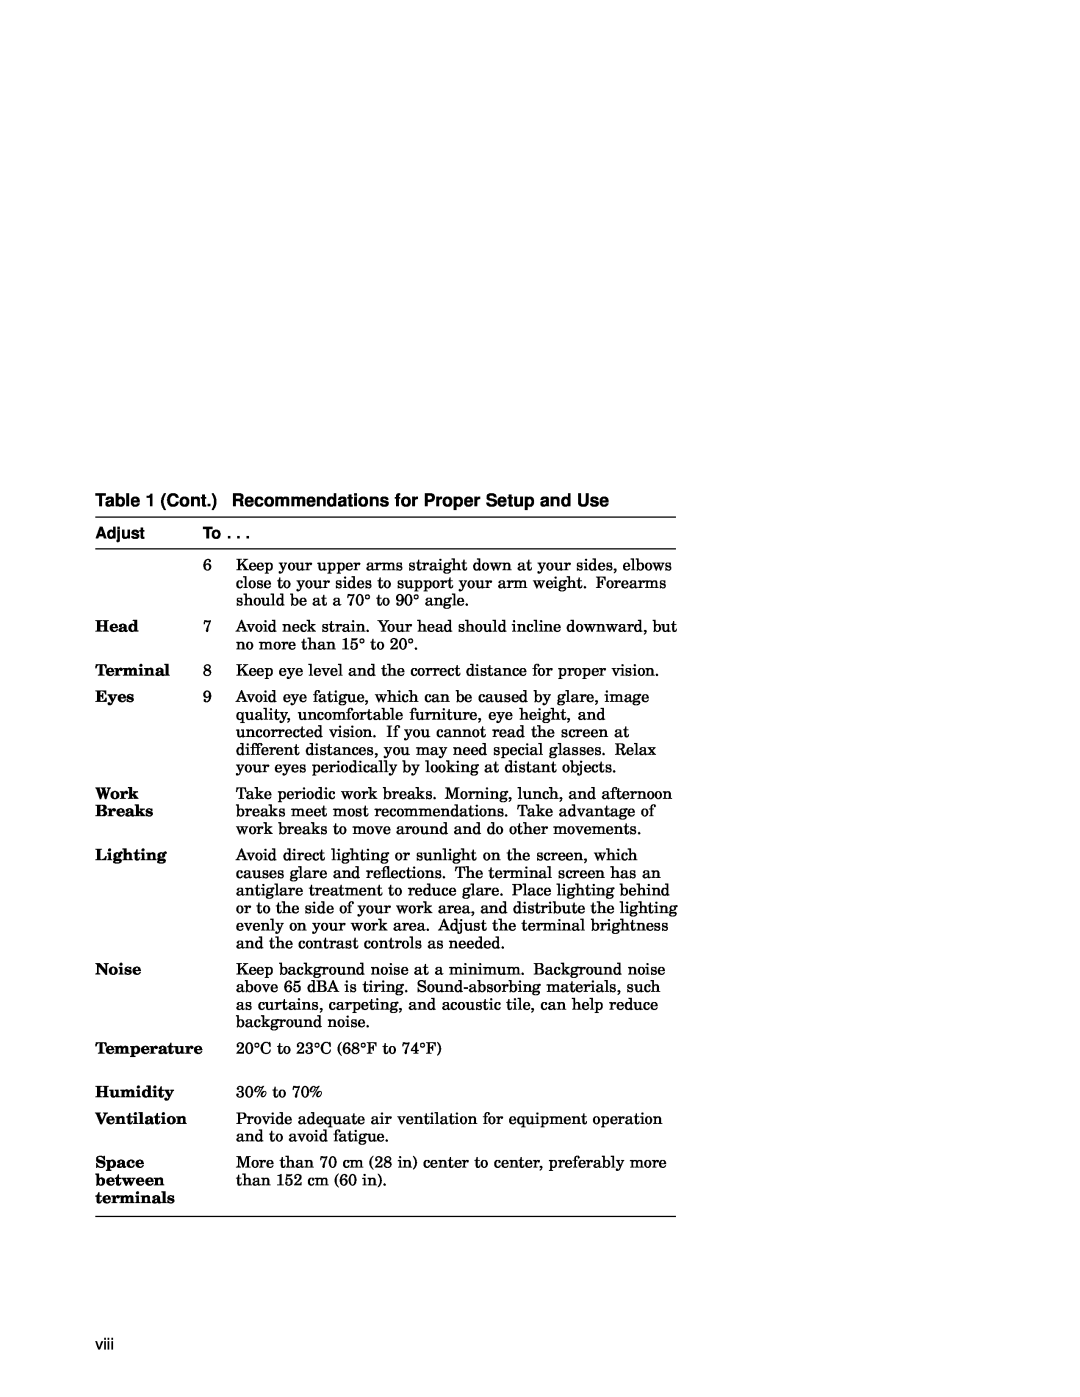 IBM WS525 manual Cont, Recommendations for Proper Setup and Use, Adjust 